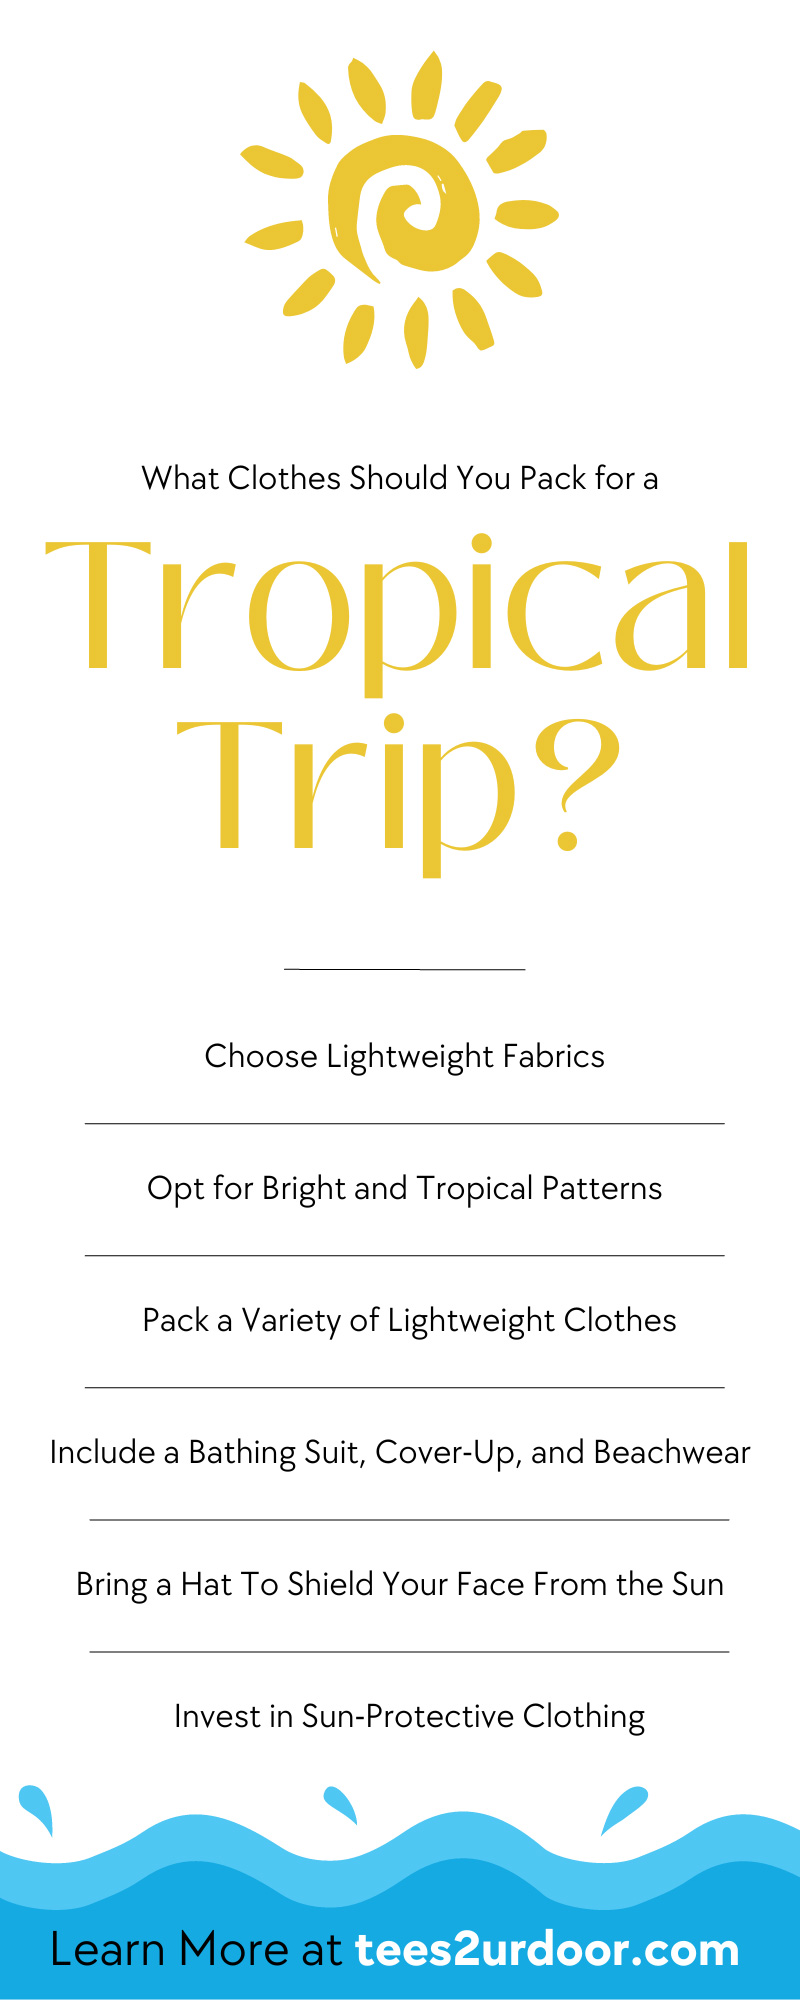 What Clothes Should You Pack for a Tropical Trip?